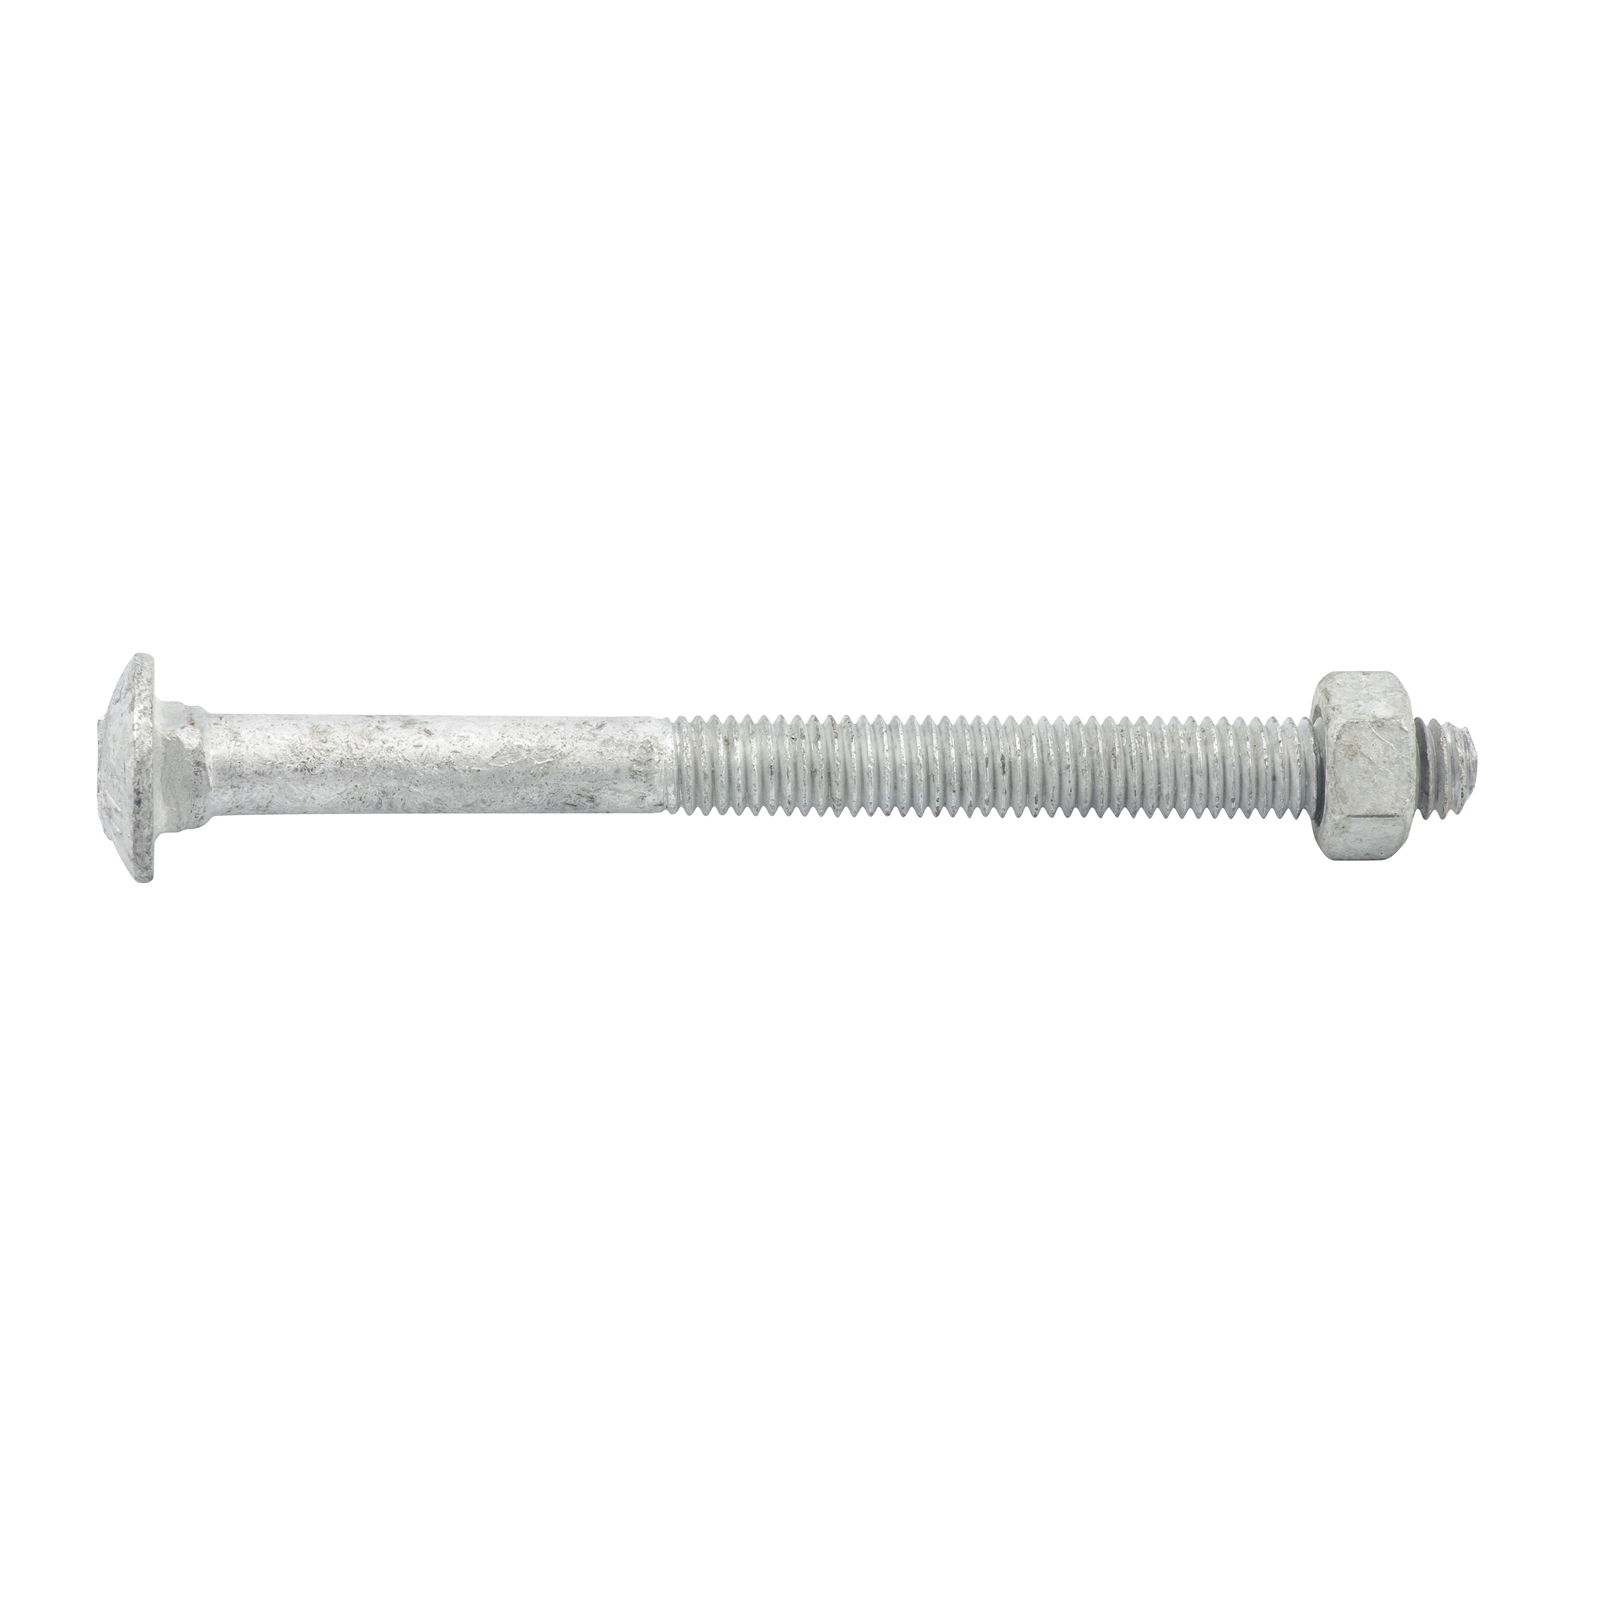 Zenith M8 x 100mm Galvanised Cup Head Bolt and Nut